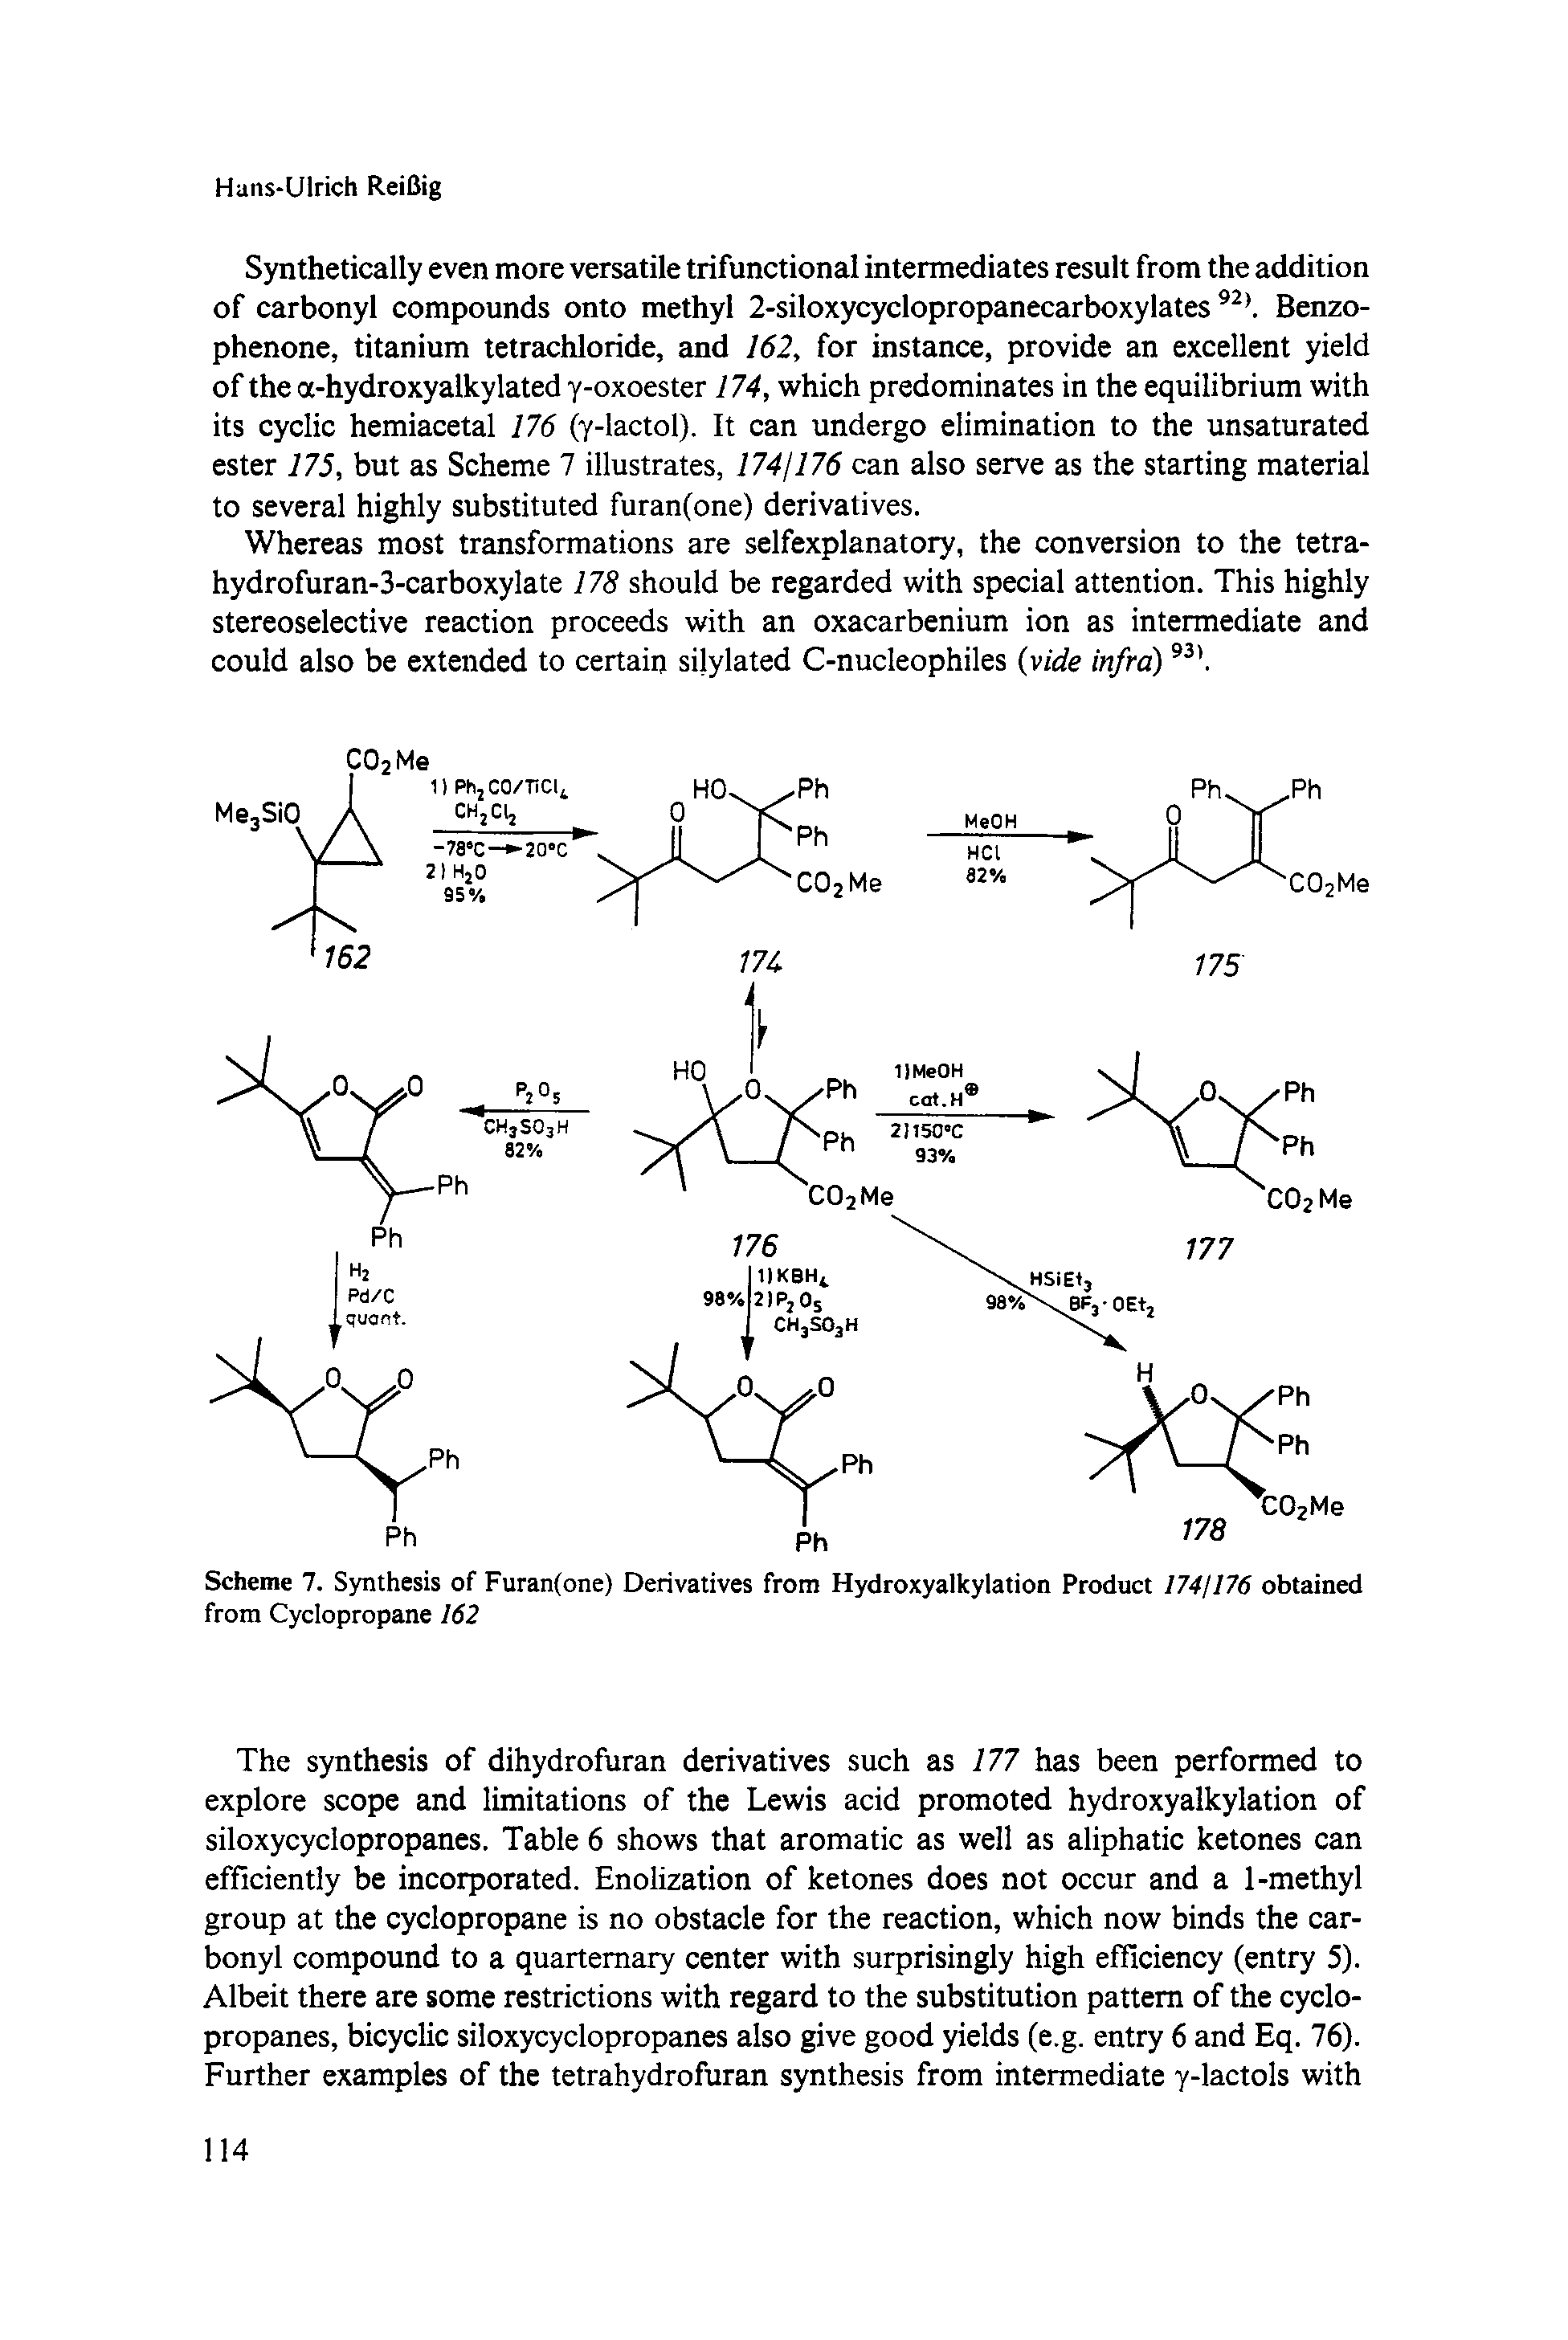 Scheme 7. Synthesis of Furan(one) Derivatives from Hydroxyalkylation Product 1741176 obtained from Cyclopropane 162...